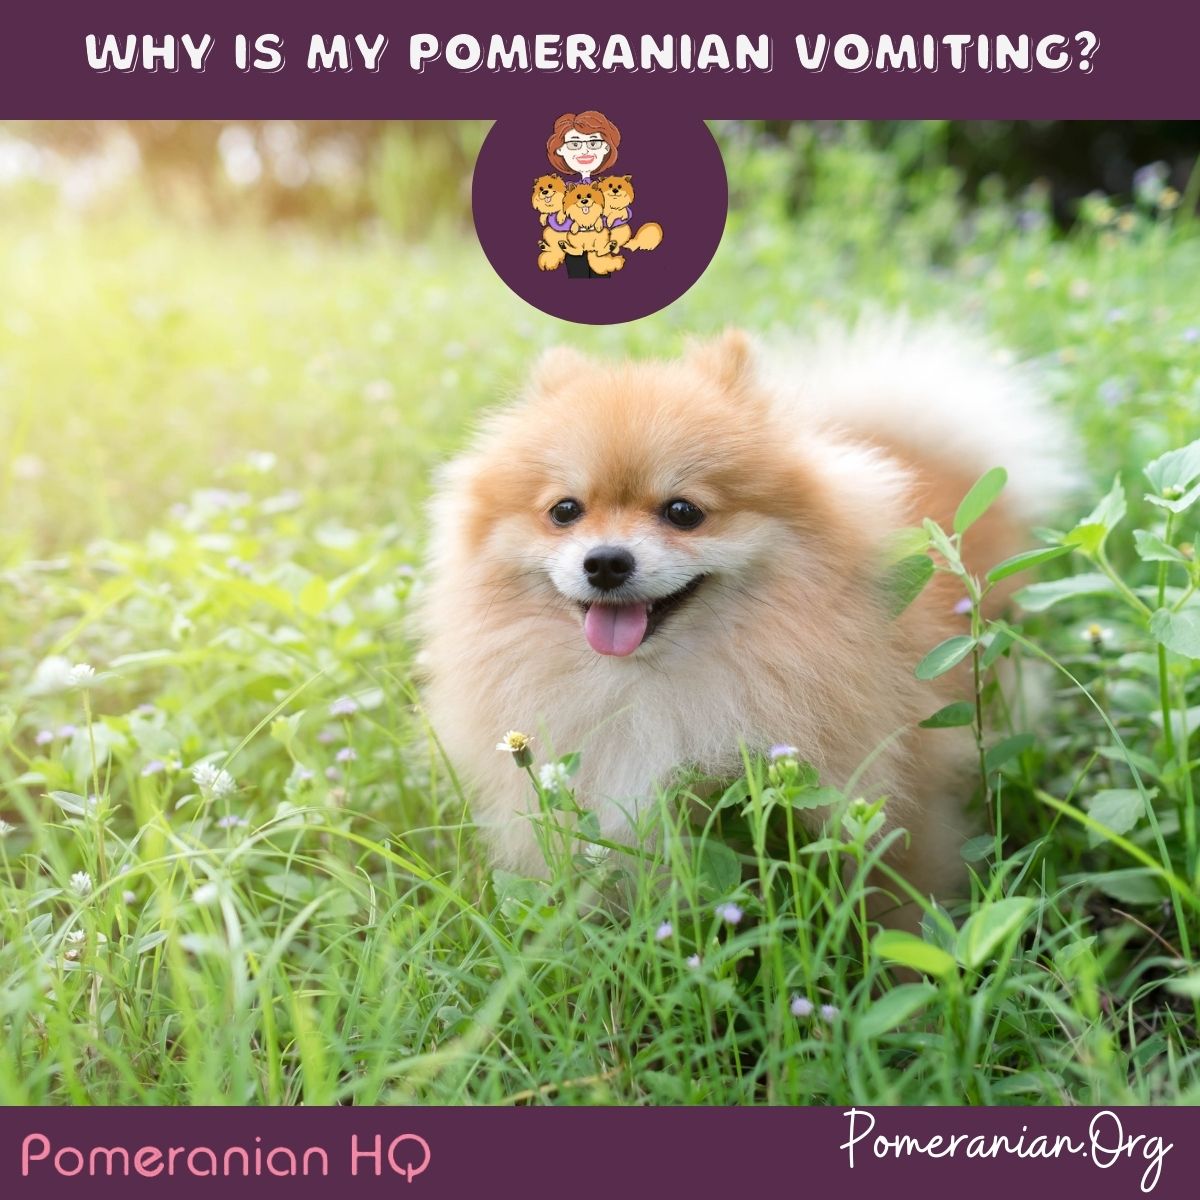 Why Is My Pomeranian Vomiting?